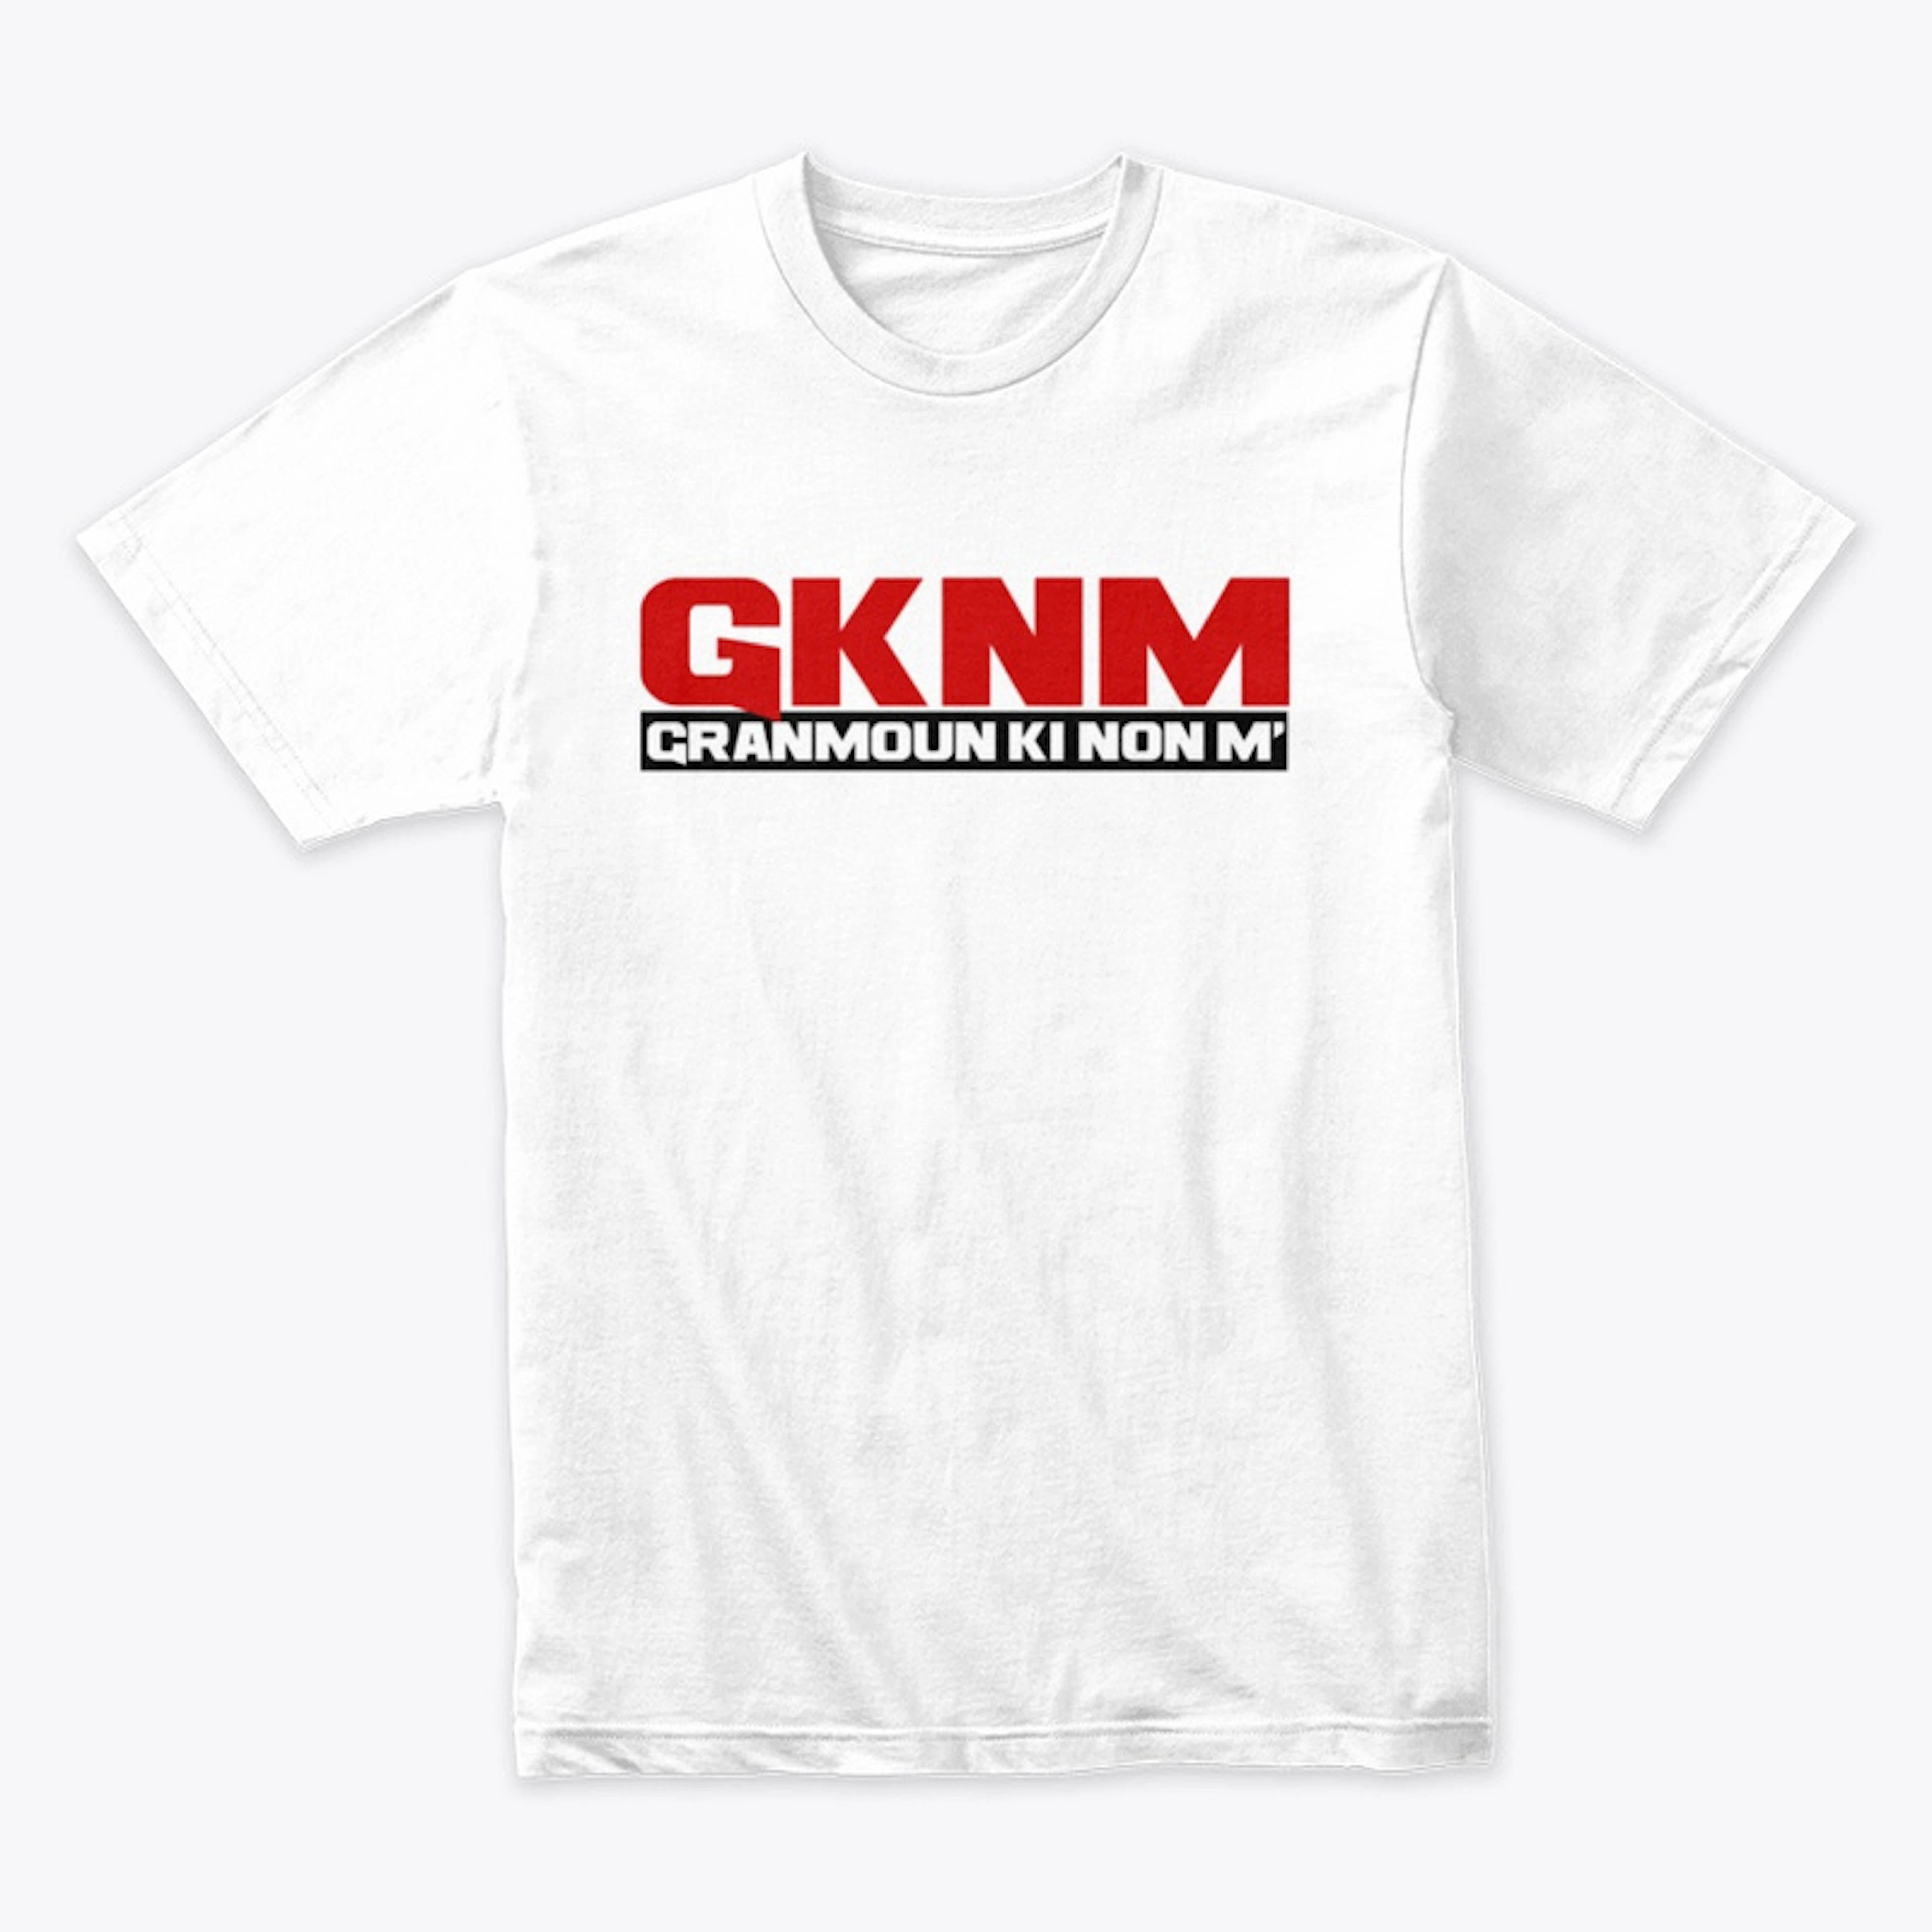 GKNM Collection